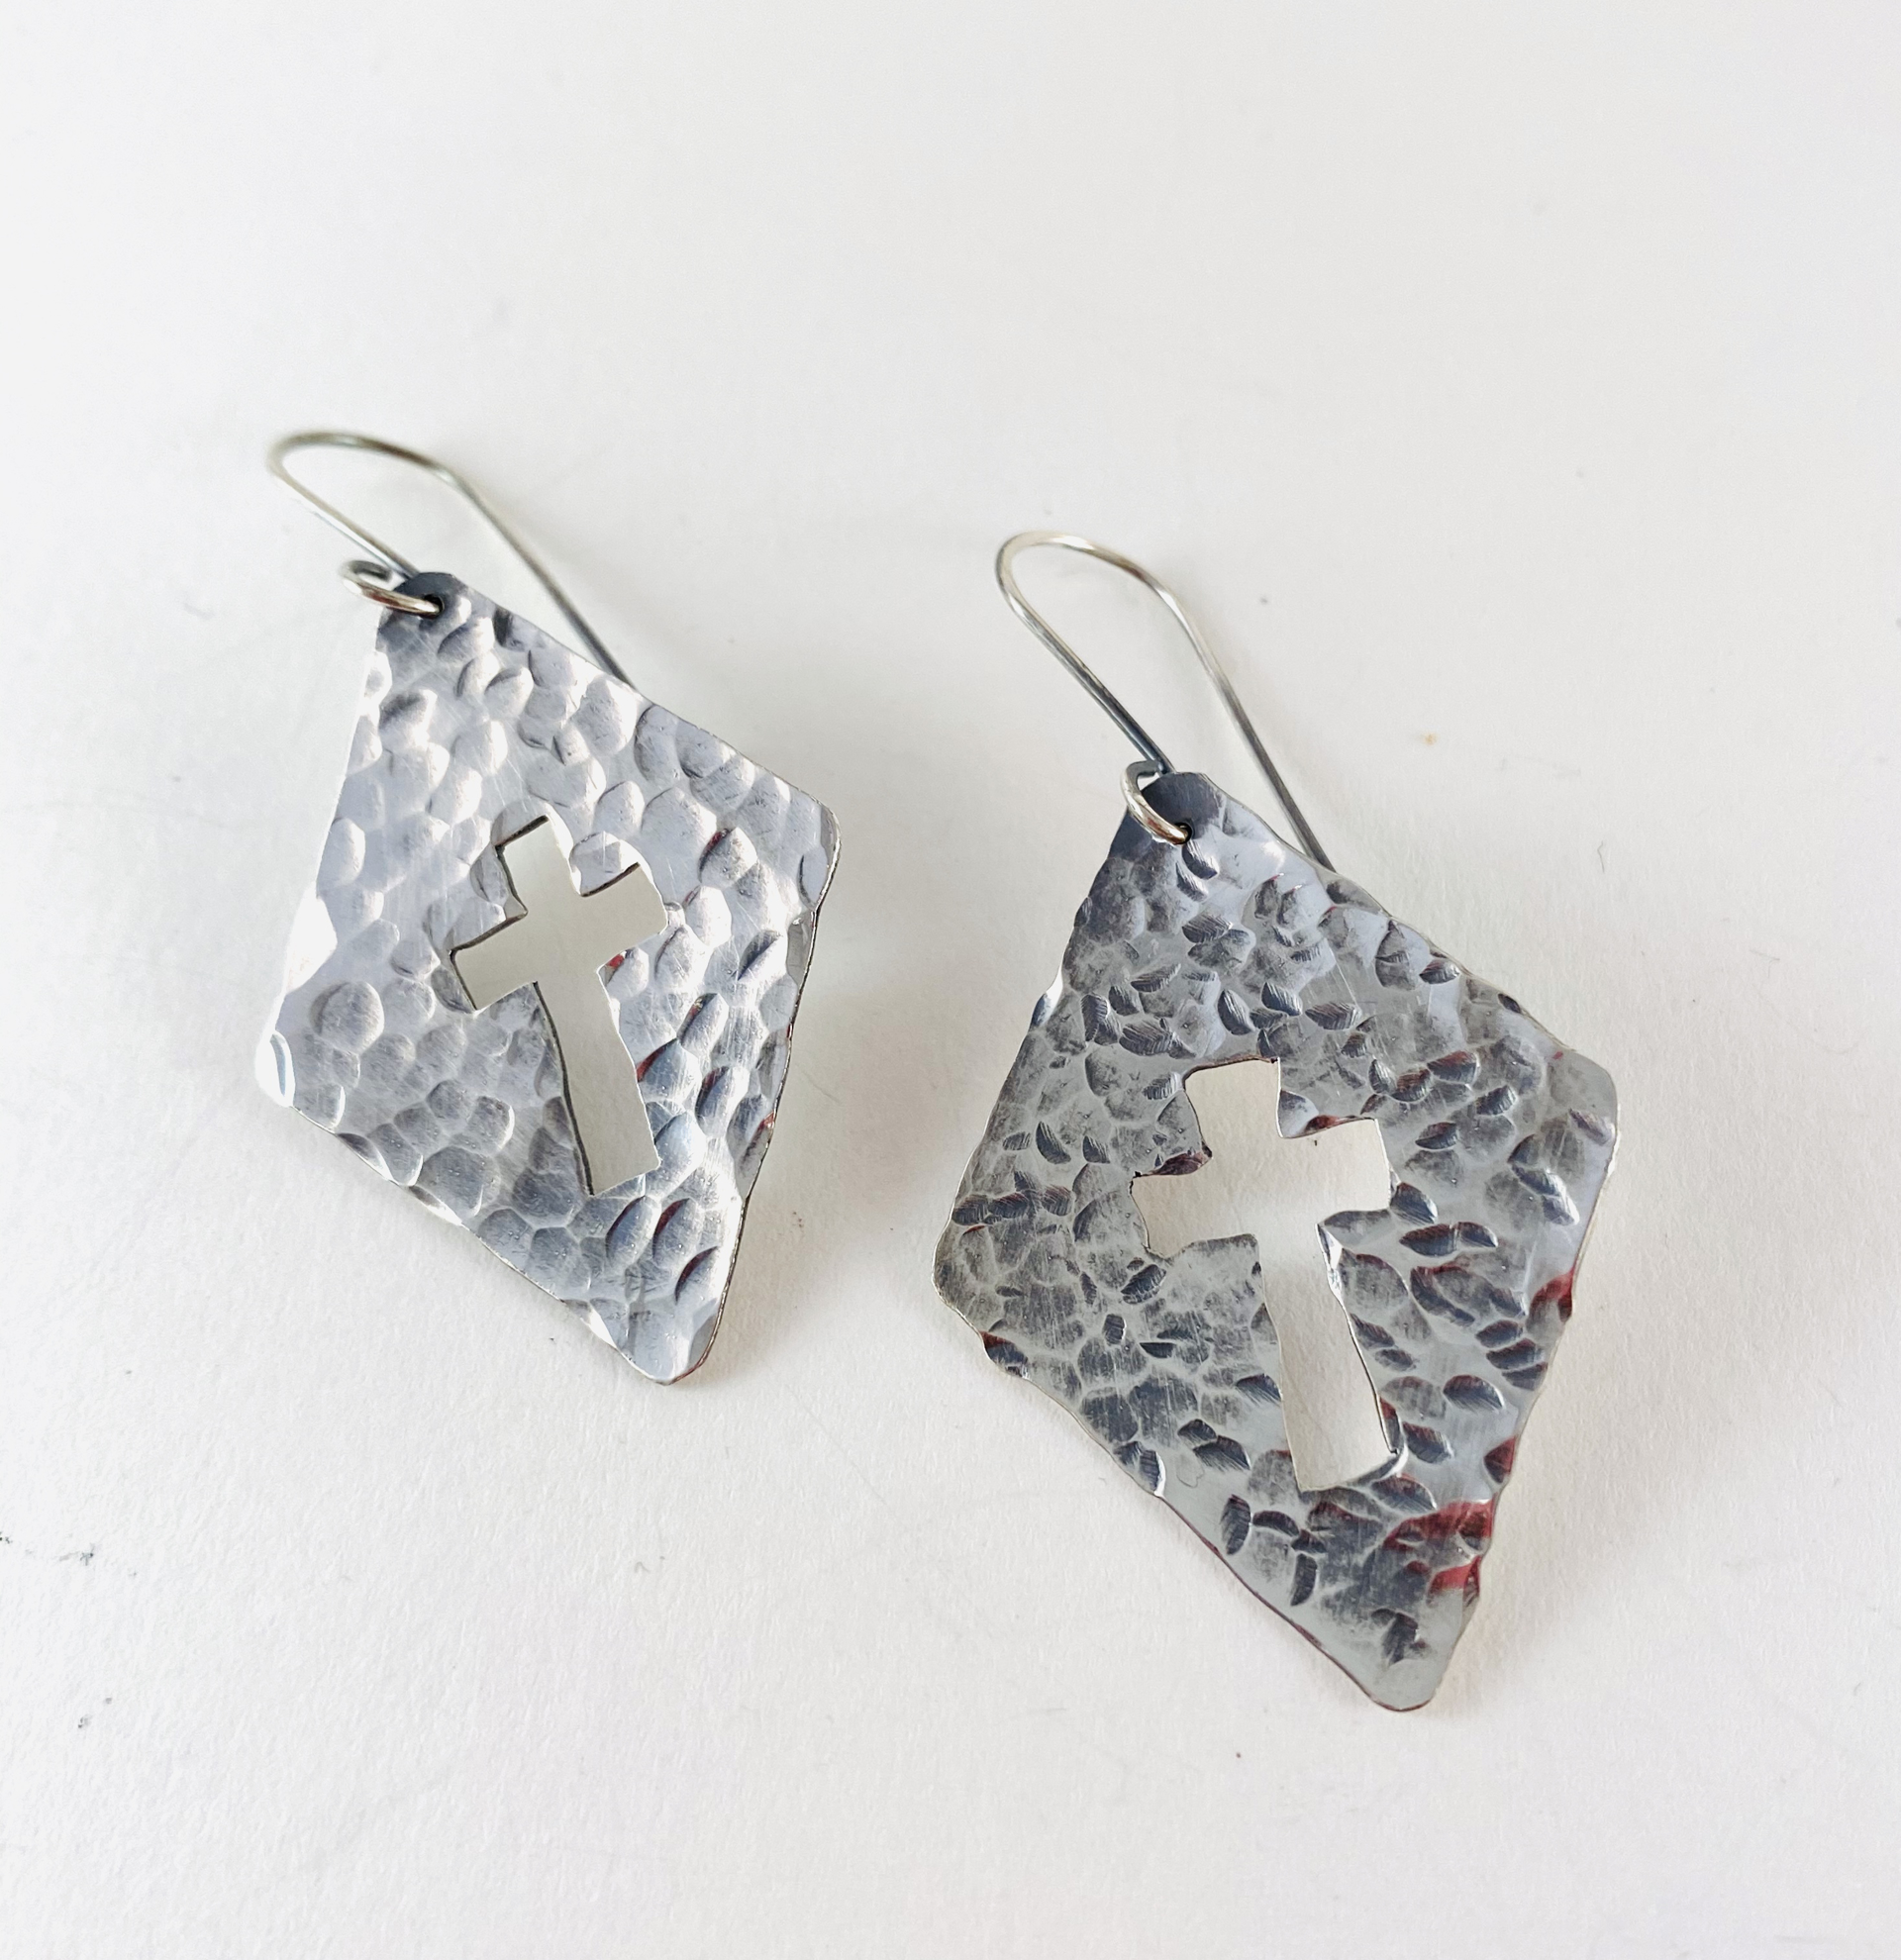 AB20-11 Hand Hammered and Cross Cut Out Silver Earrings by Anne Bivens